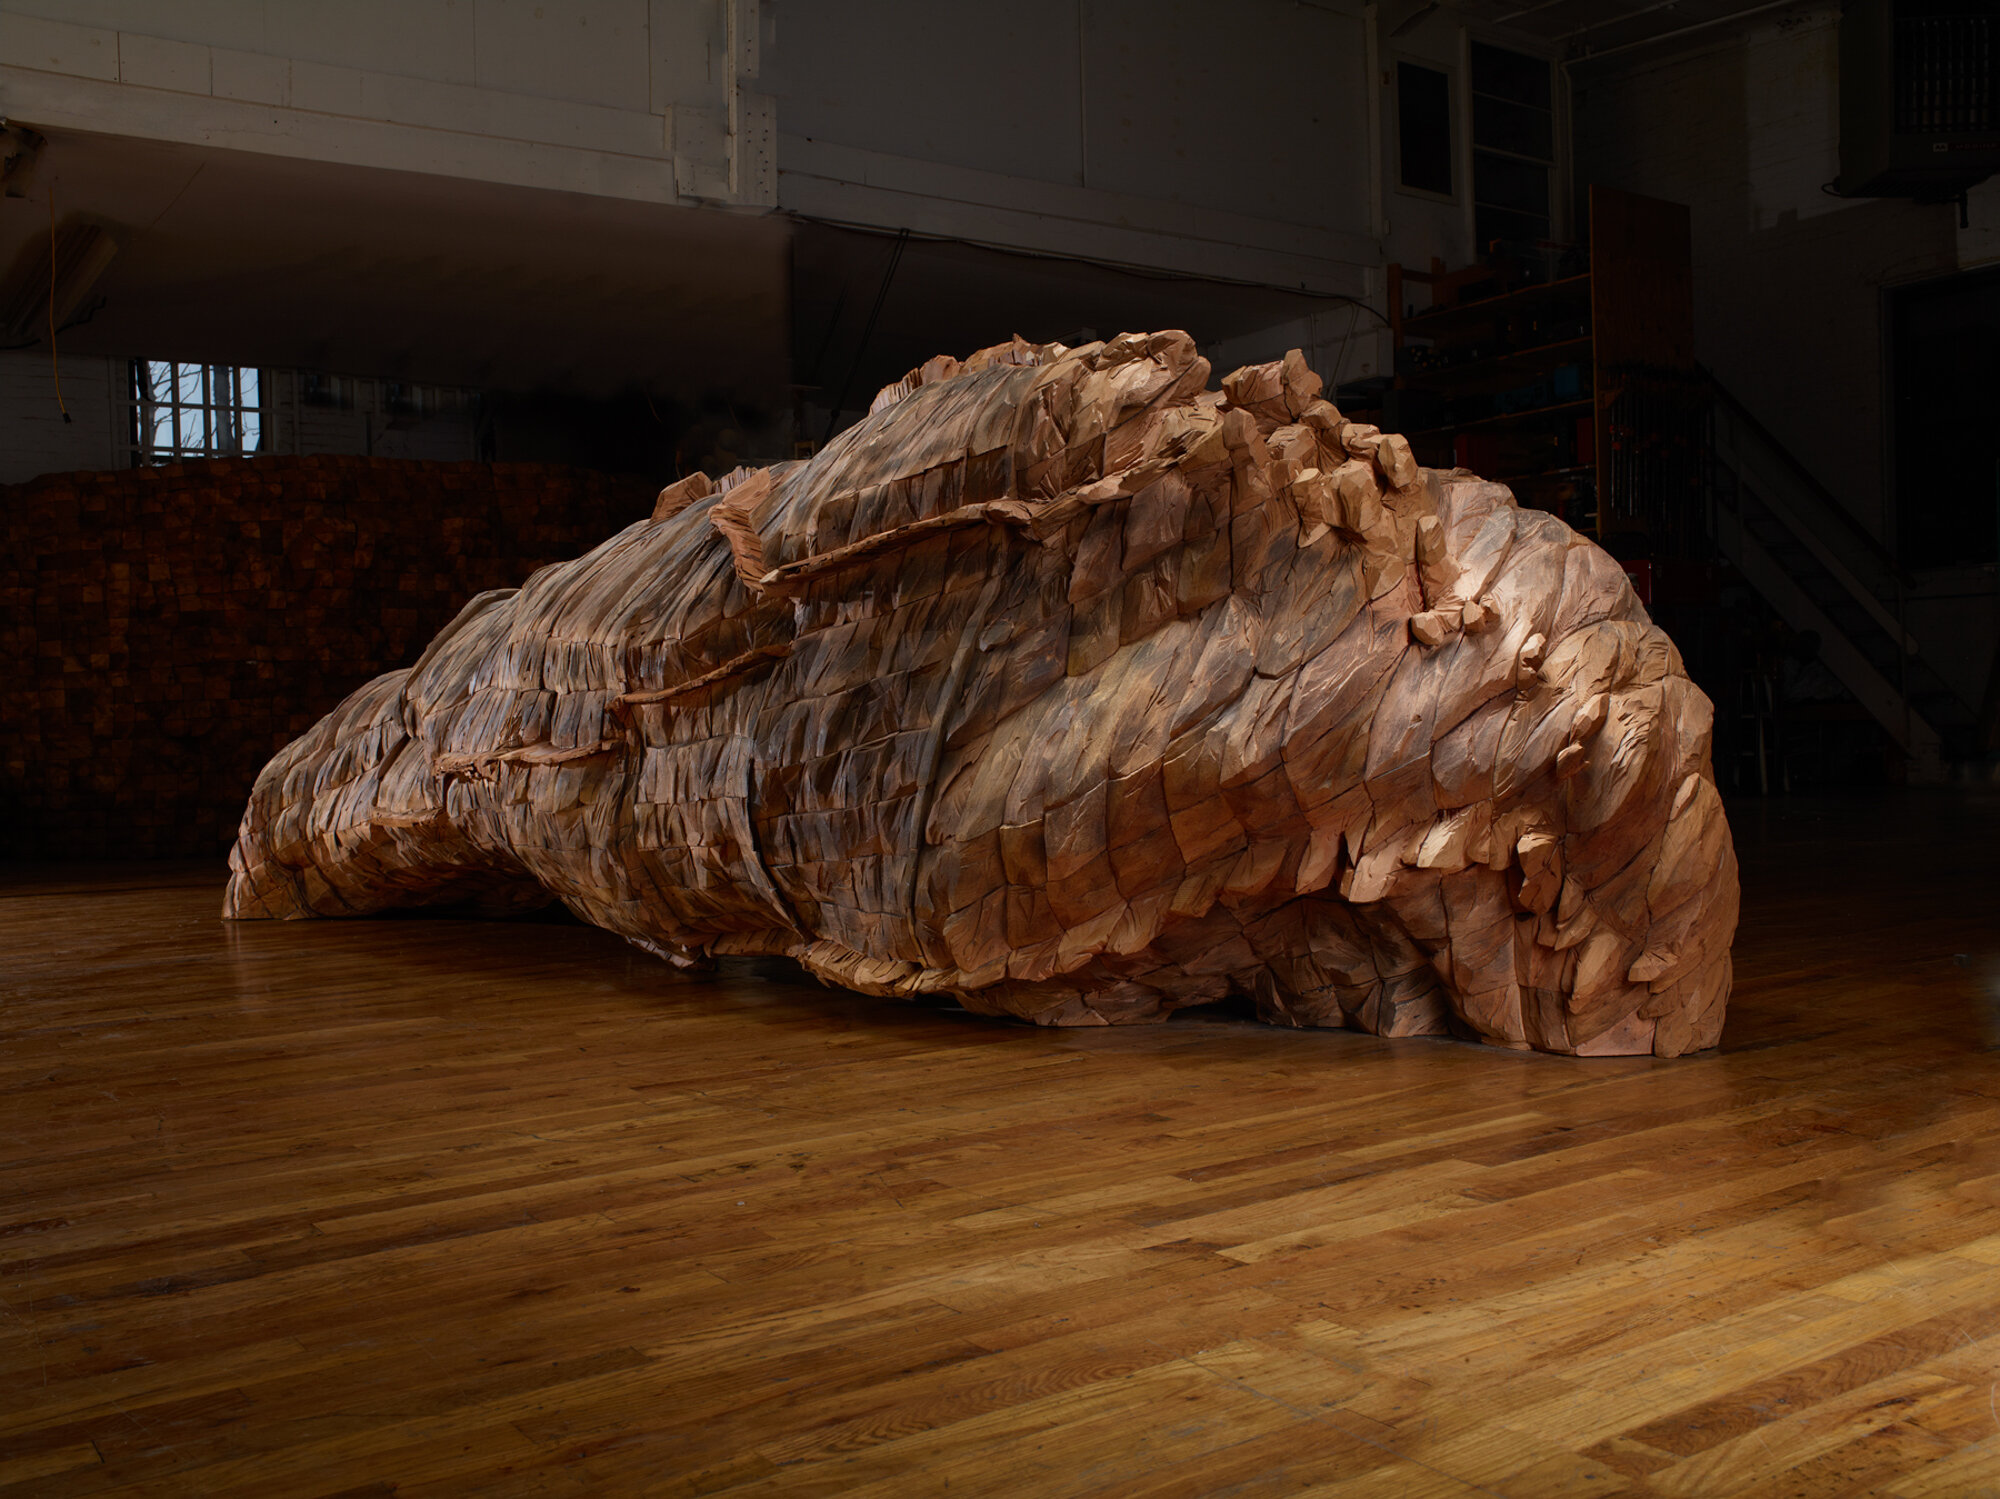       OCEAN VOICES , 2011-2012 Cedar and graphite 53 x 185 x 67 in.    MORE IMAGES   The National Museum Of Women In The Arts  